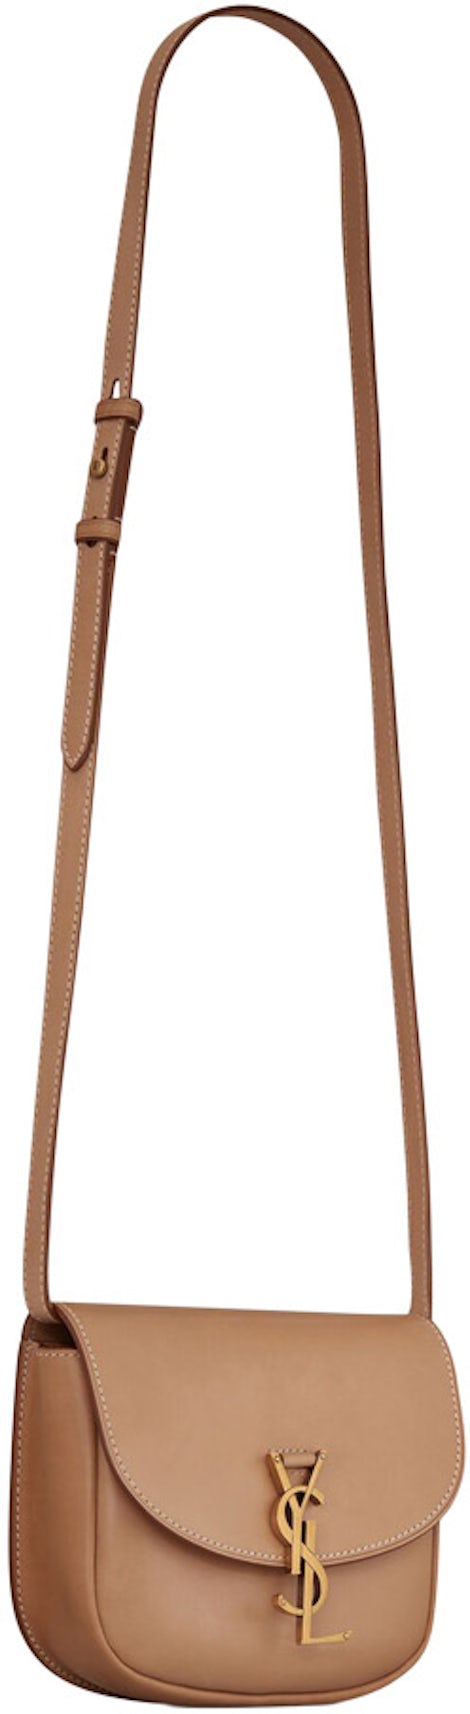 le monogramme crossbody bag in cassandre canvas and smooth leather